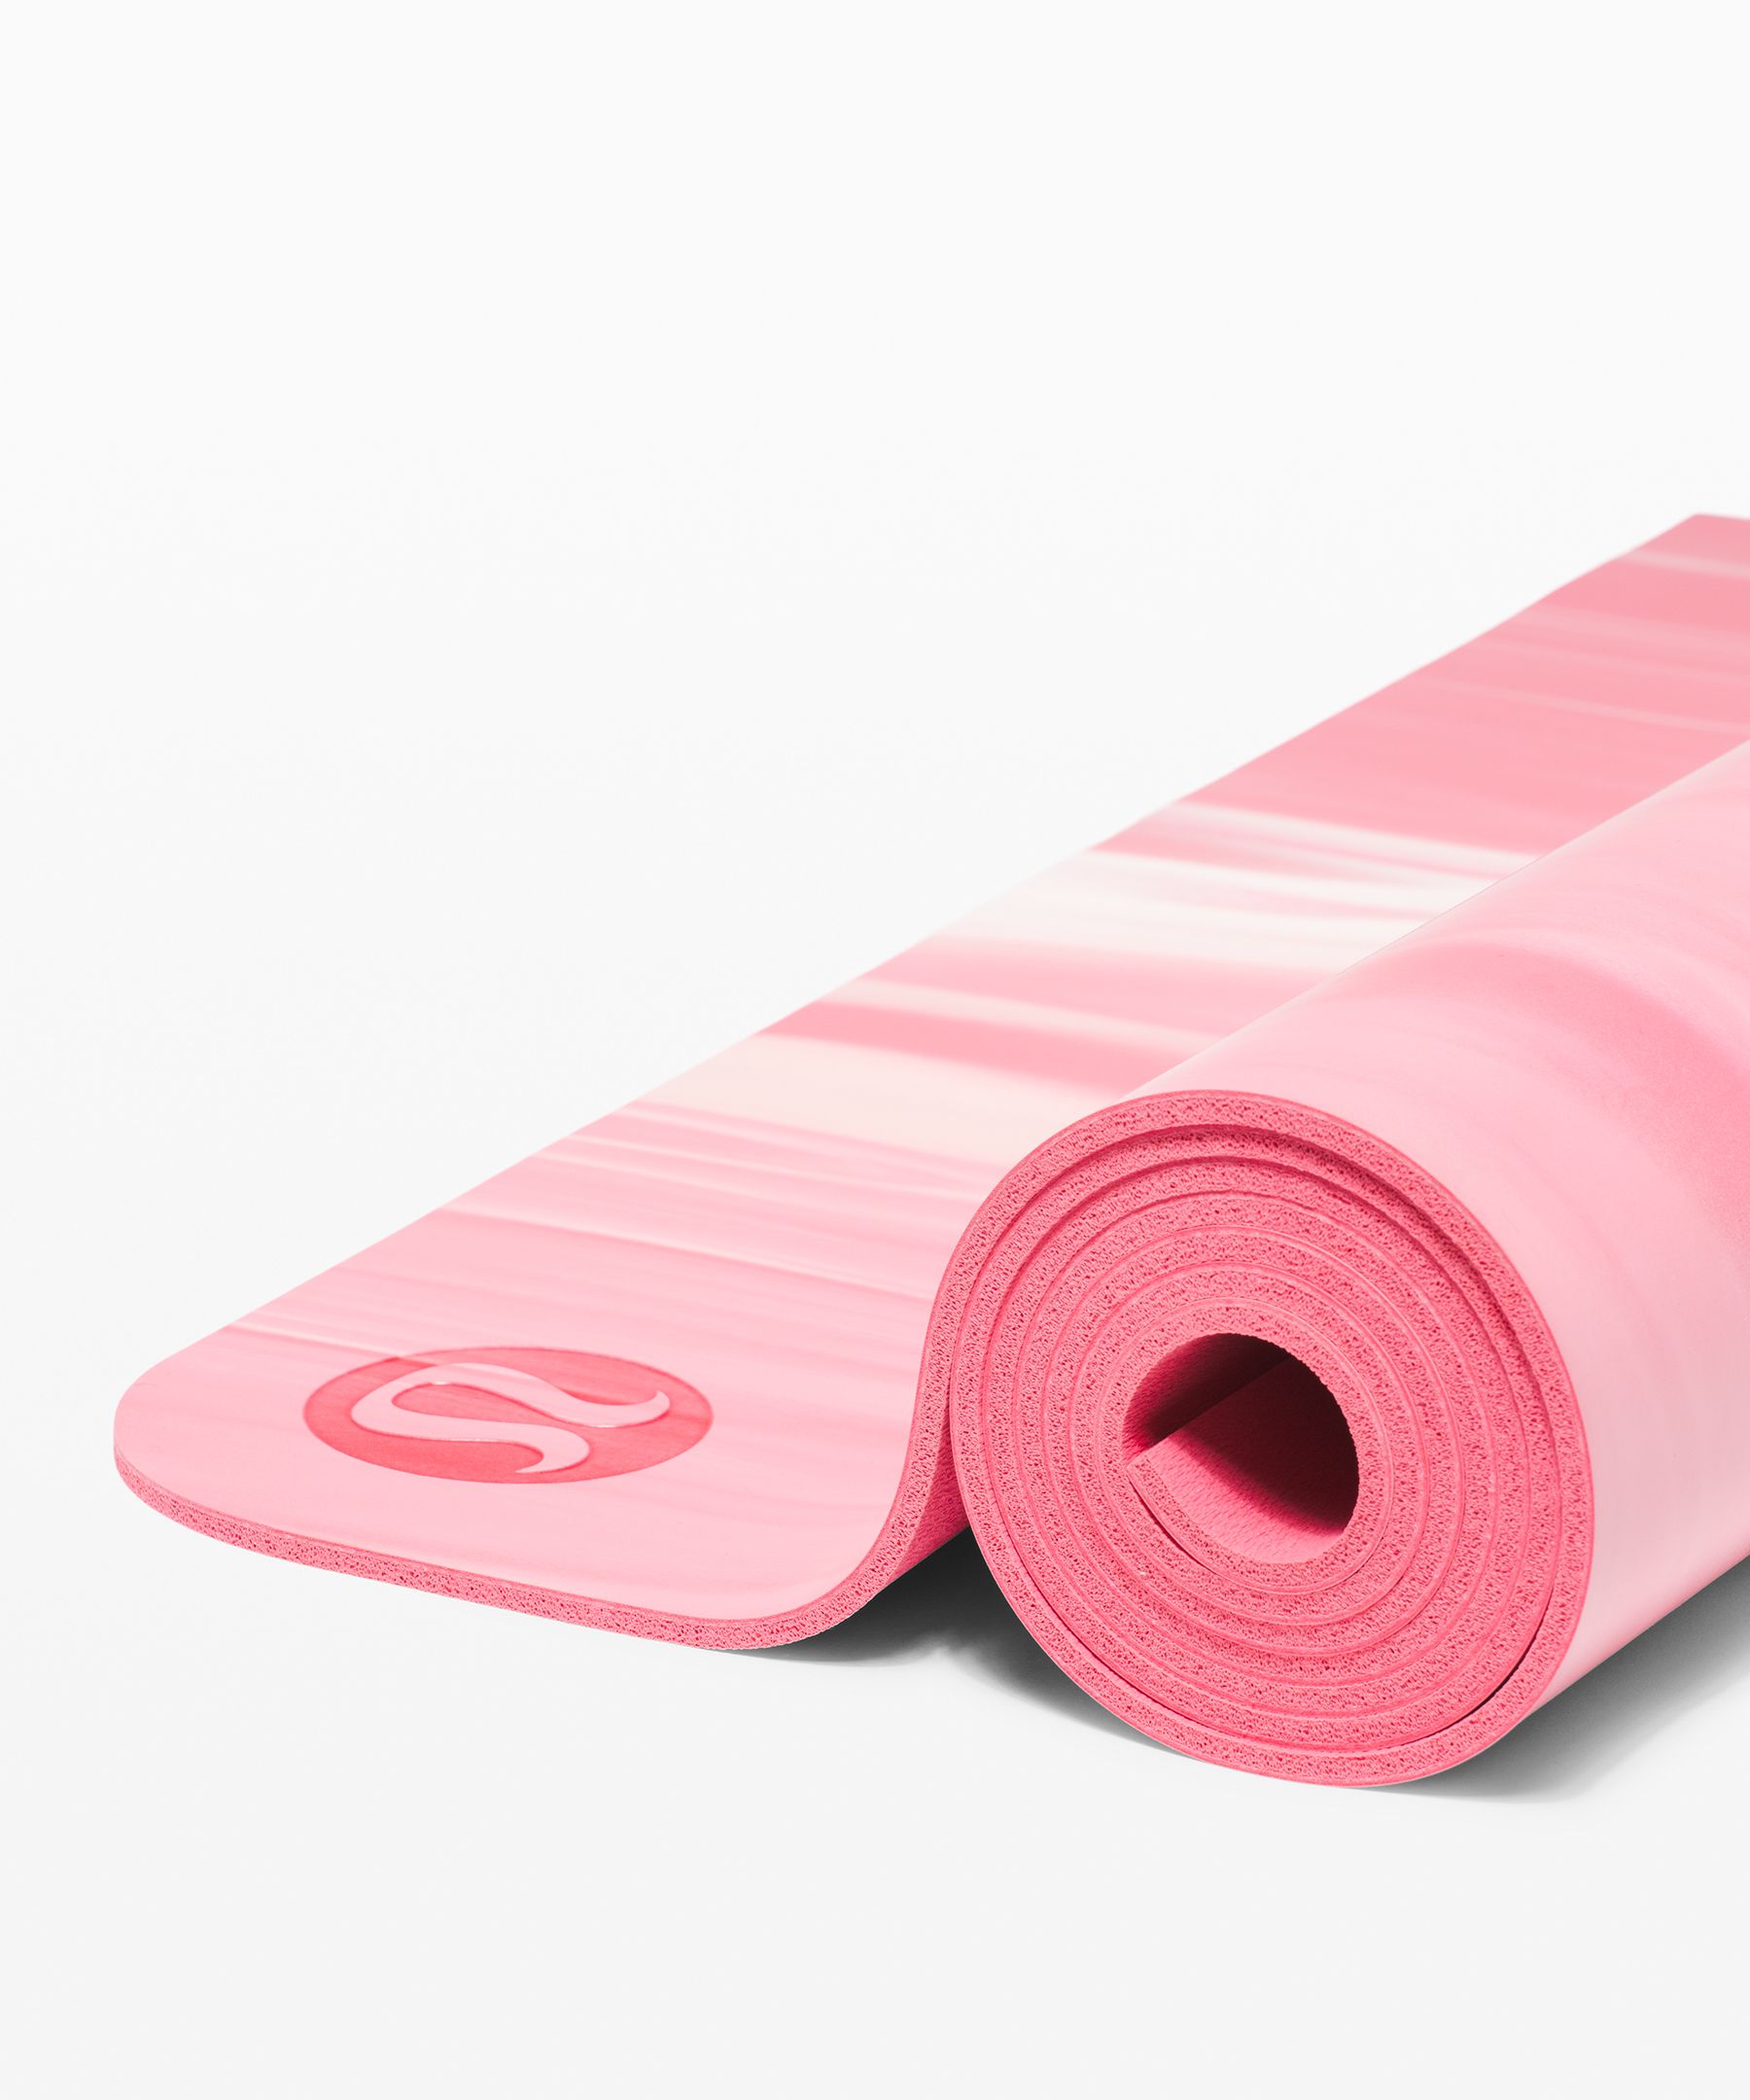 Lululemon Arise Yoga Mat Review  International Society of Precision  Agriculture